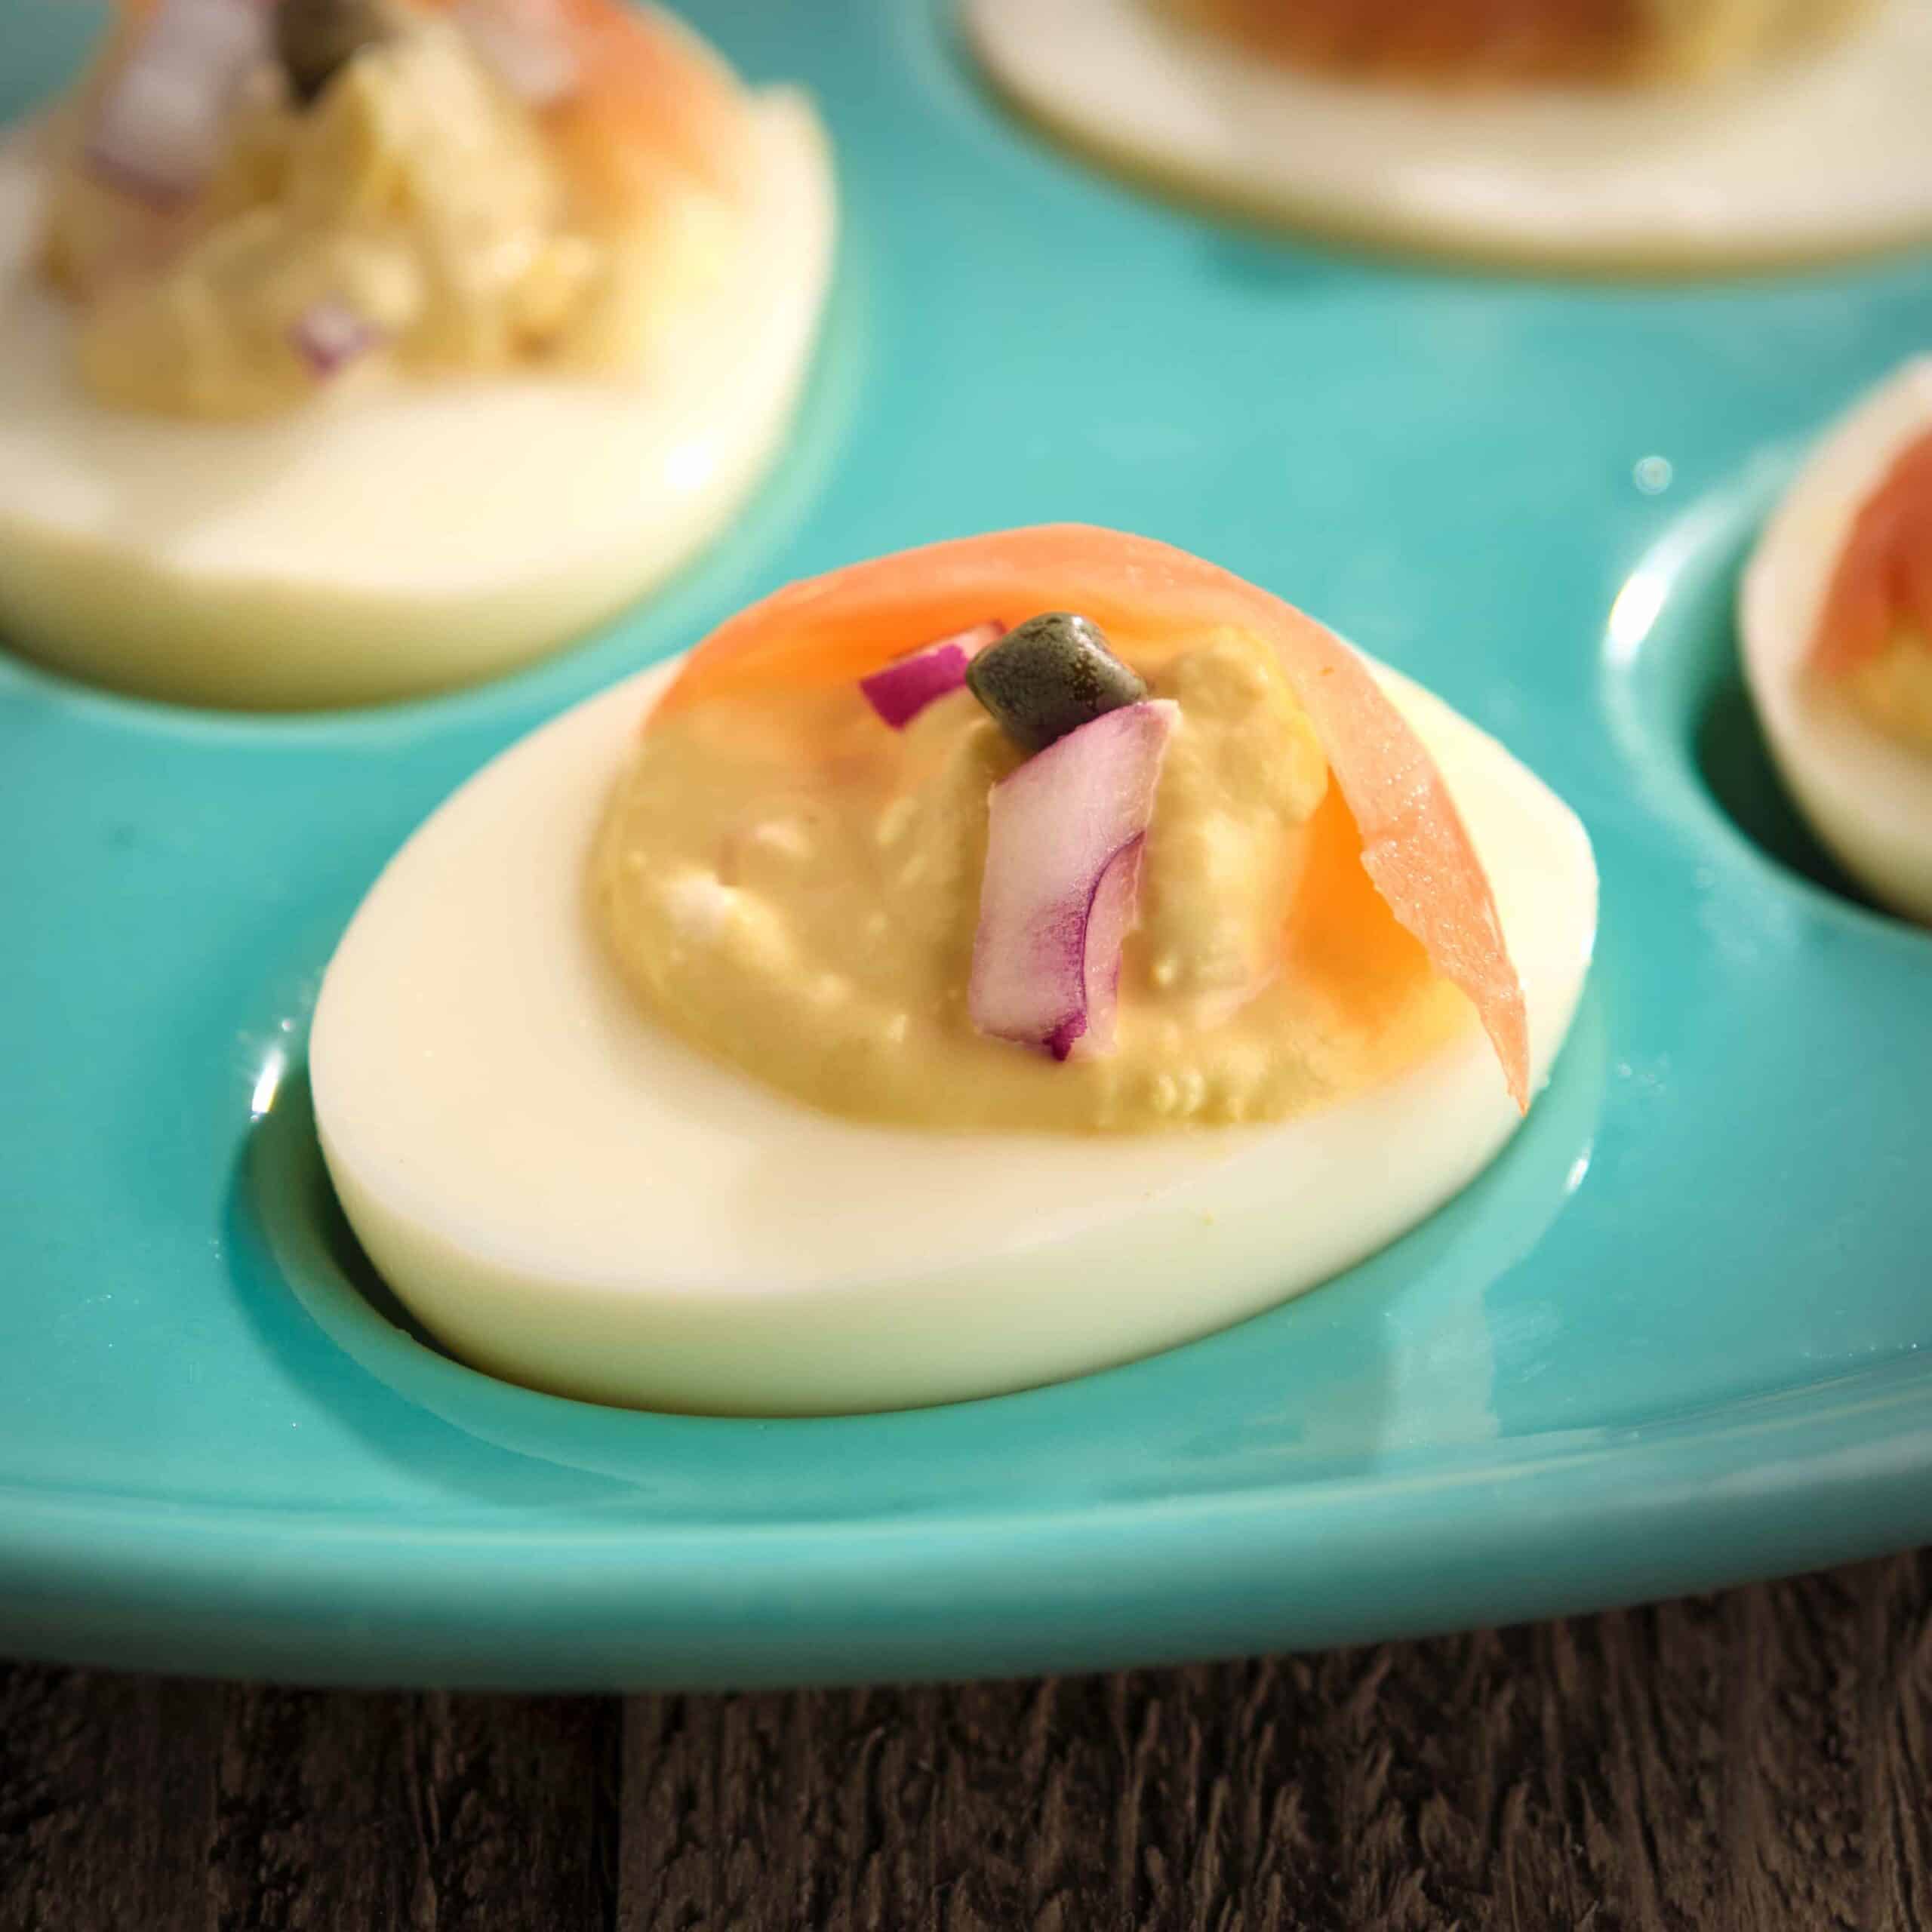 A smoked salmon deviled egg on a teal egg plate